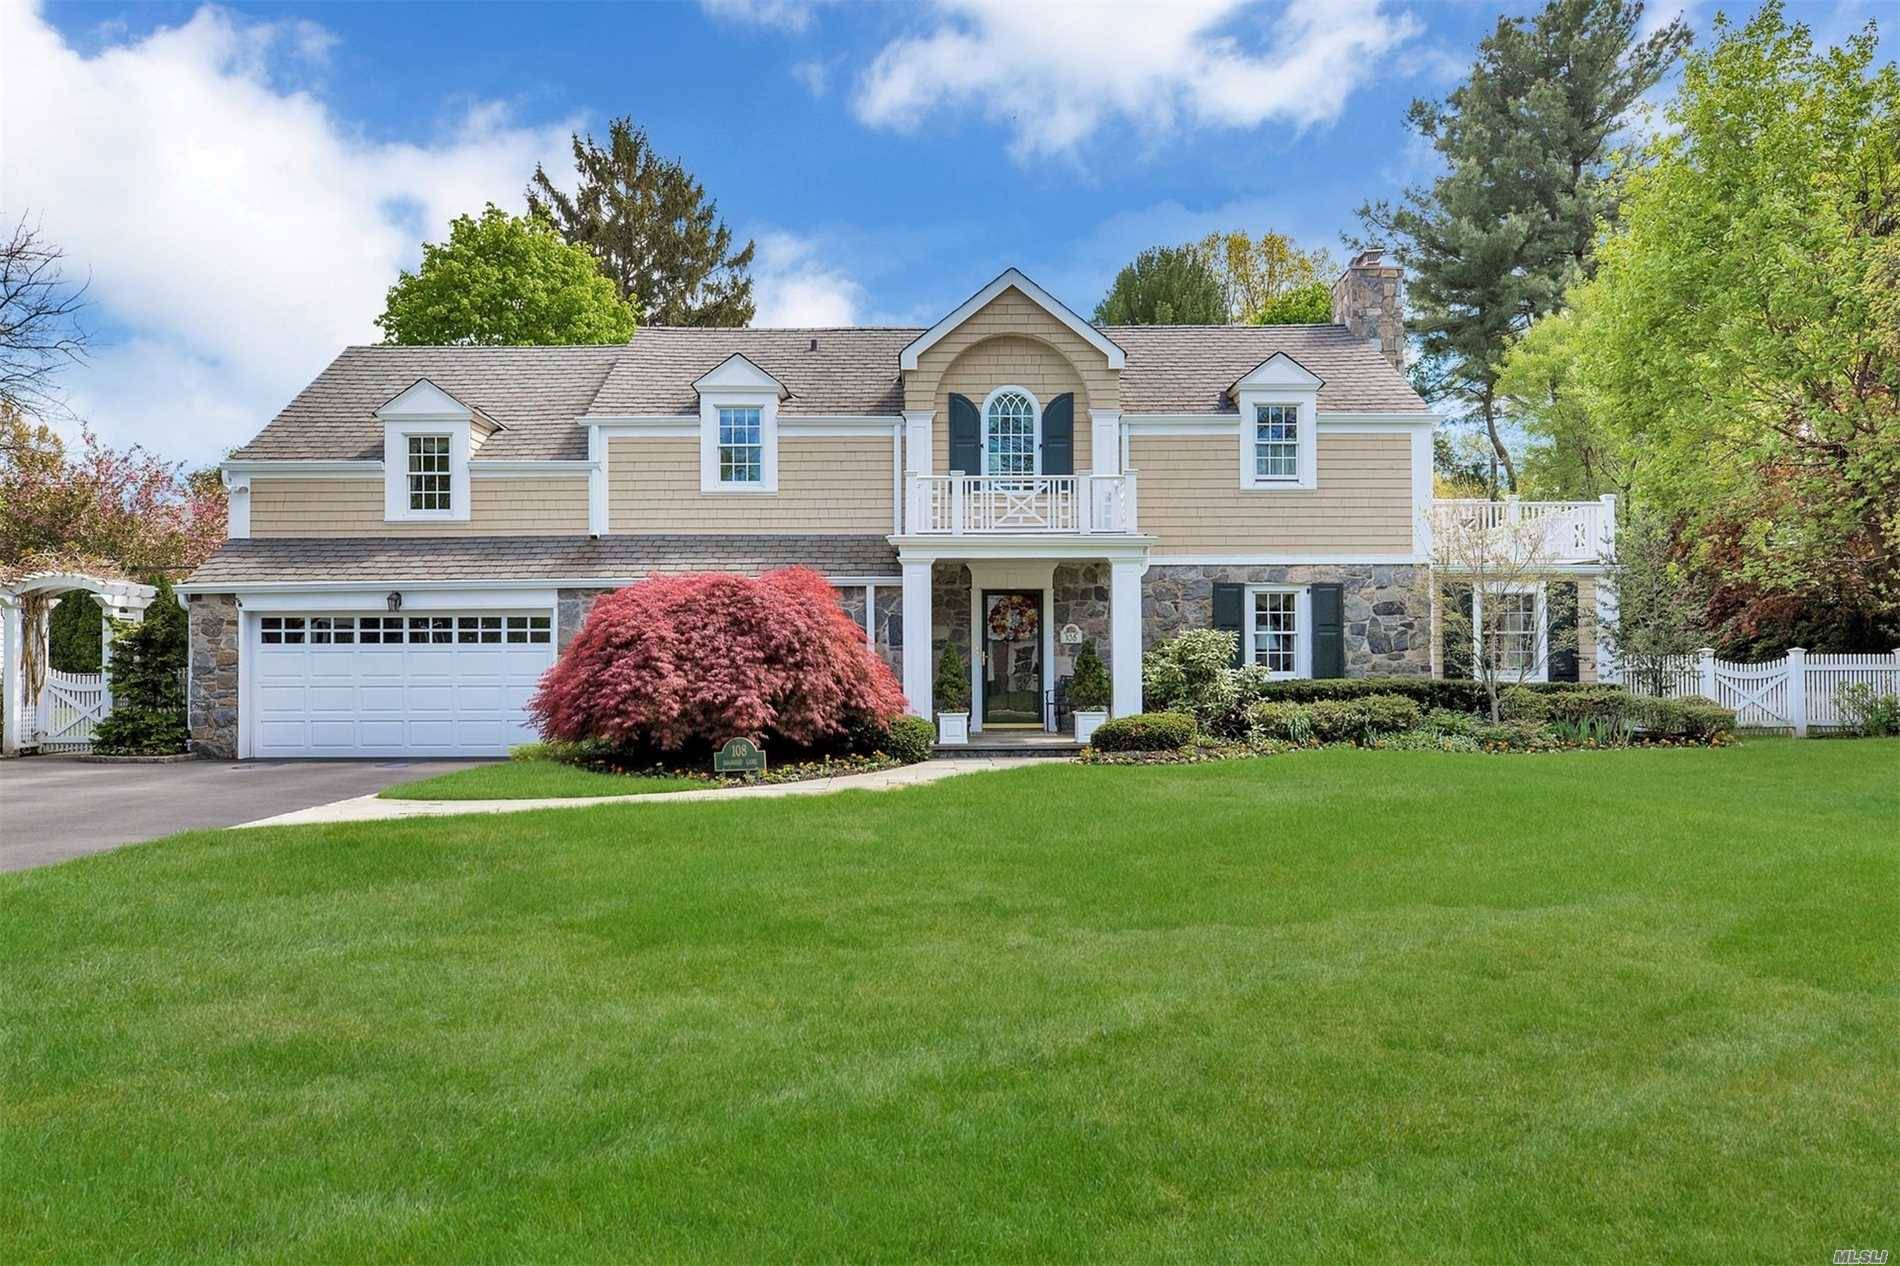 Impressive Colonial, Ideally located on a prime block, This home boasts Elegant formal rooms a Home office, Gourmet kitchen w breakfast Area, Open breathtaking great Room w 11 foot ceilings, ...